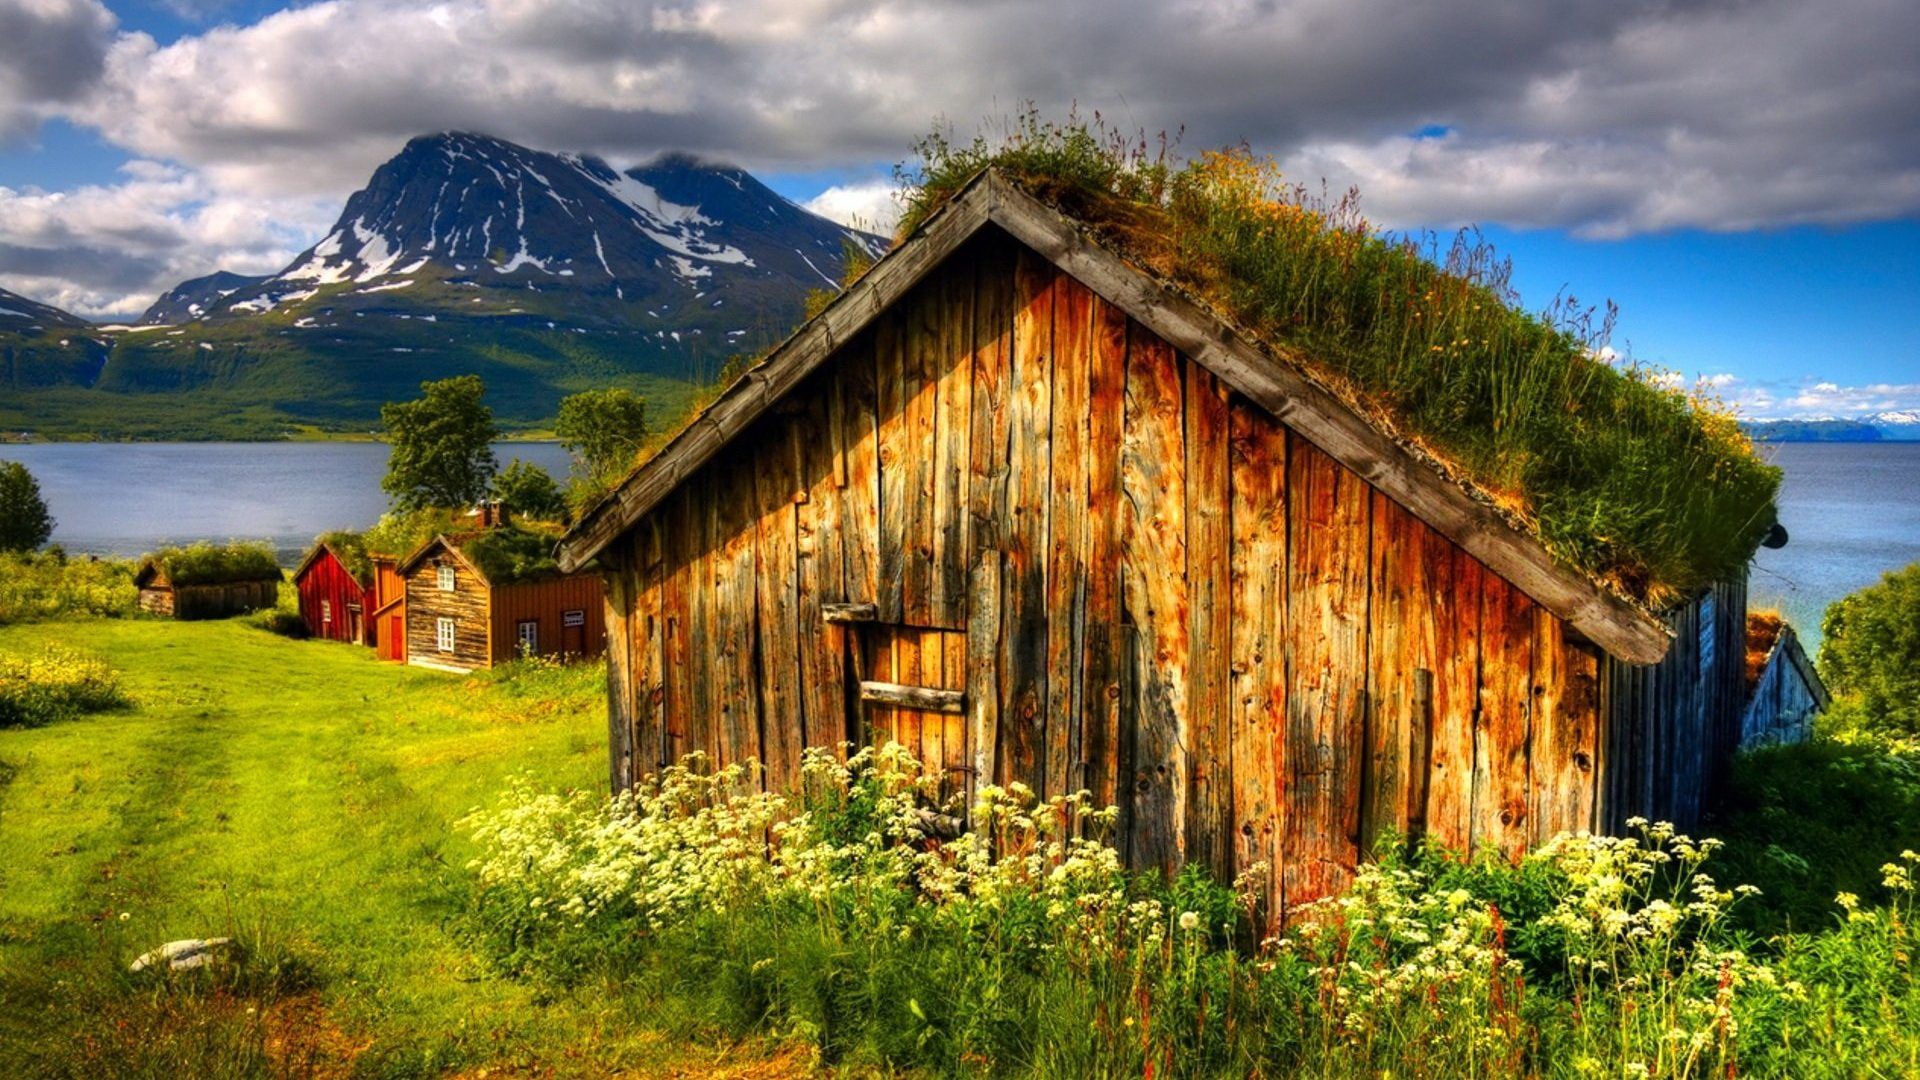 Slope Tag wallpaper: Wildflowers Farm Grass Peaceful Forest Slope. Tromso, Traditional house, Norway